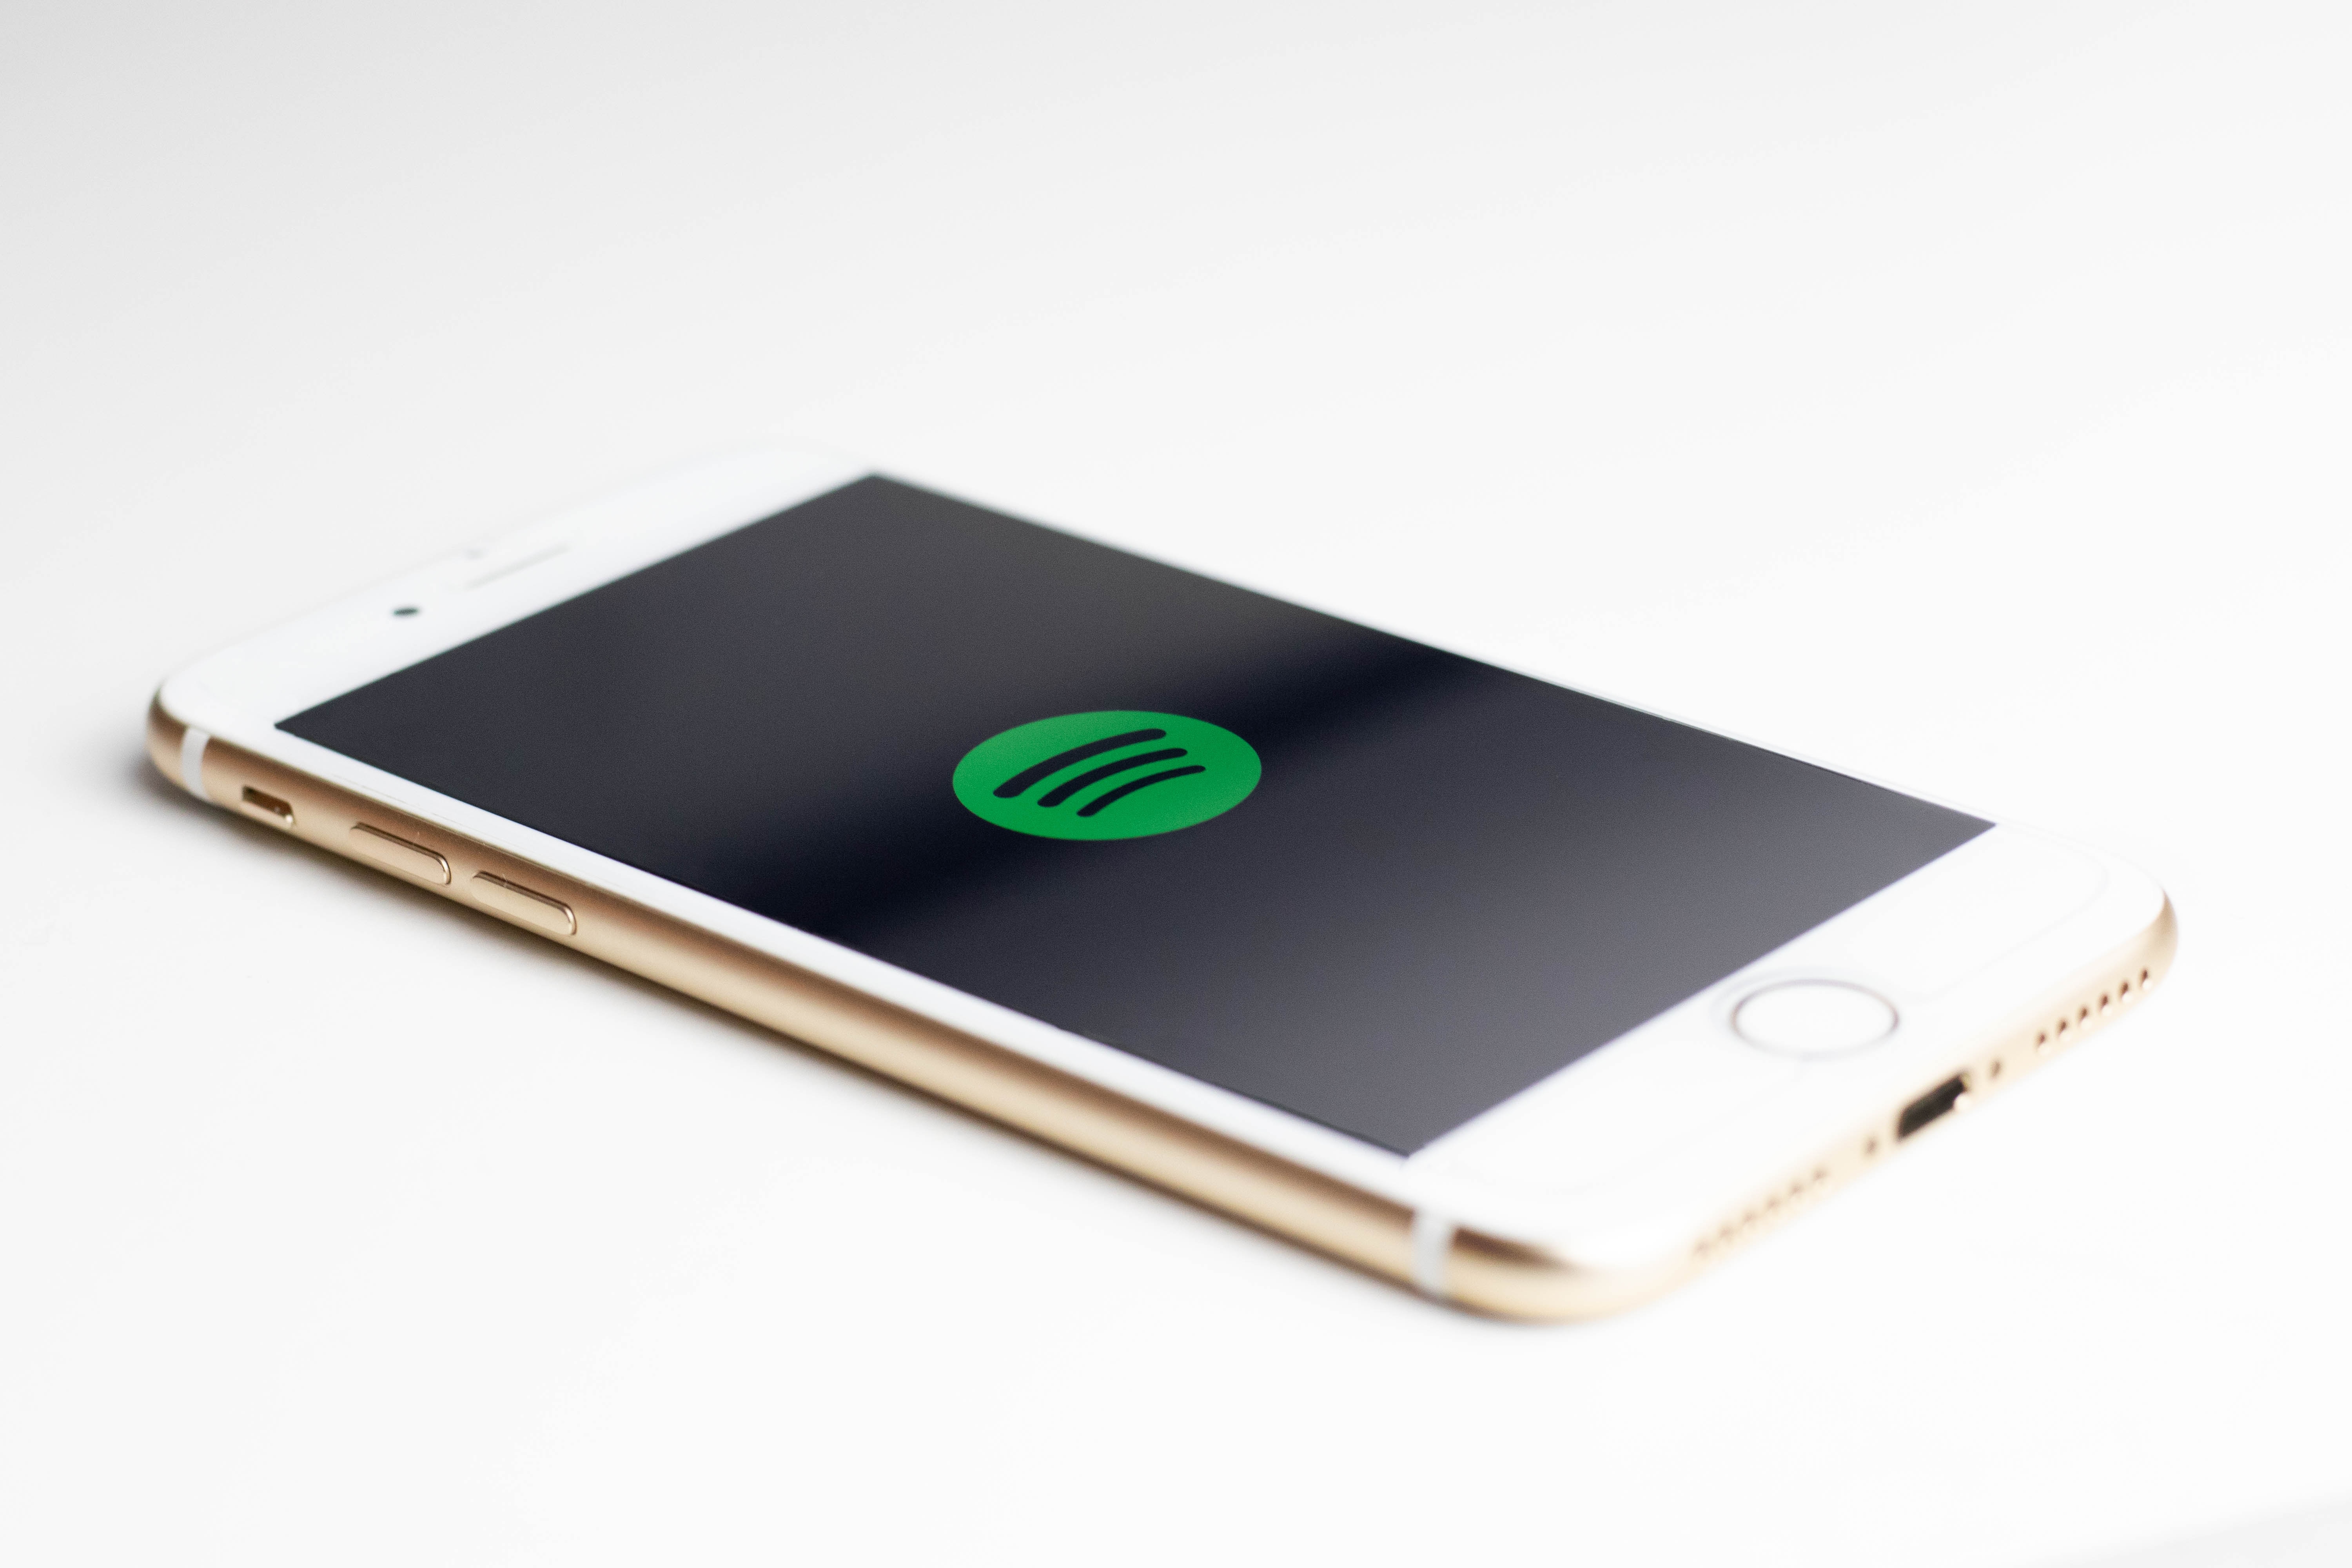 A Spotify logo on an iPhone.